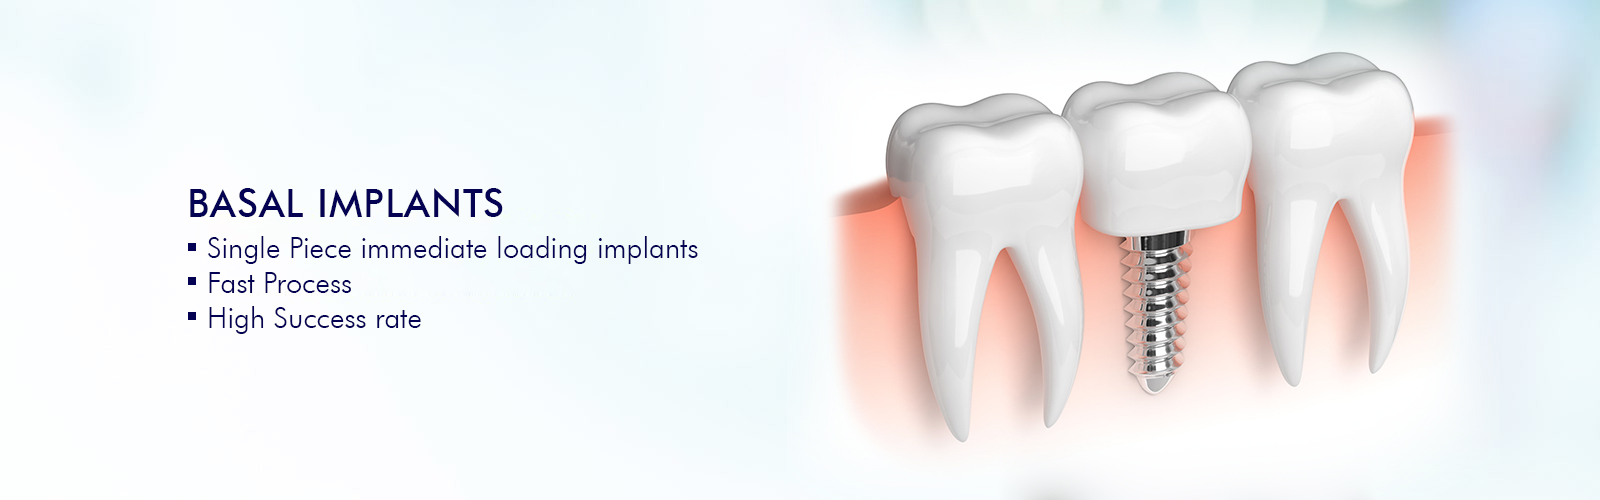 permanent-teeth-with-basal-implants-in-india